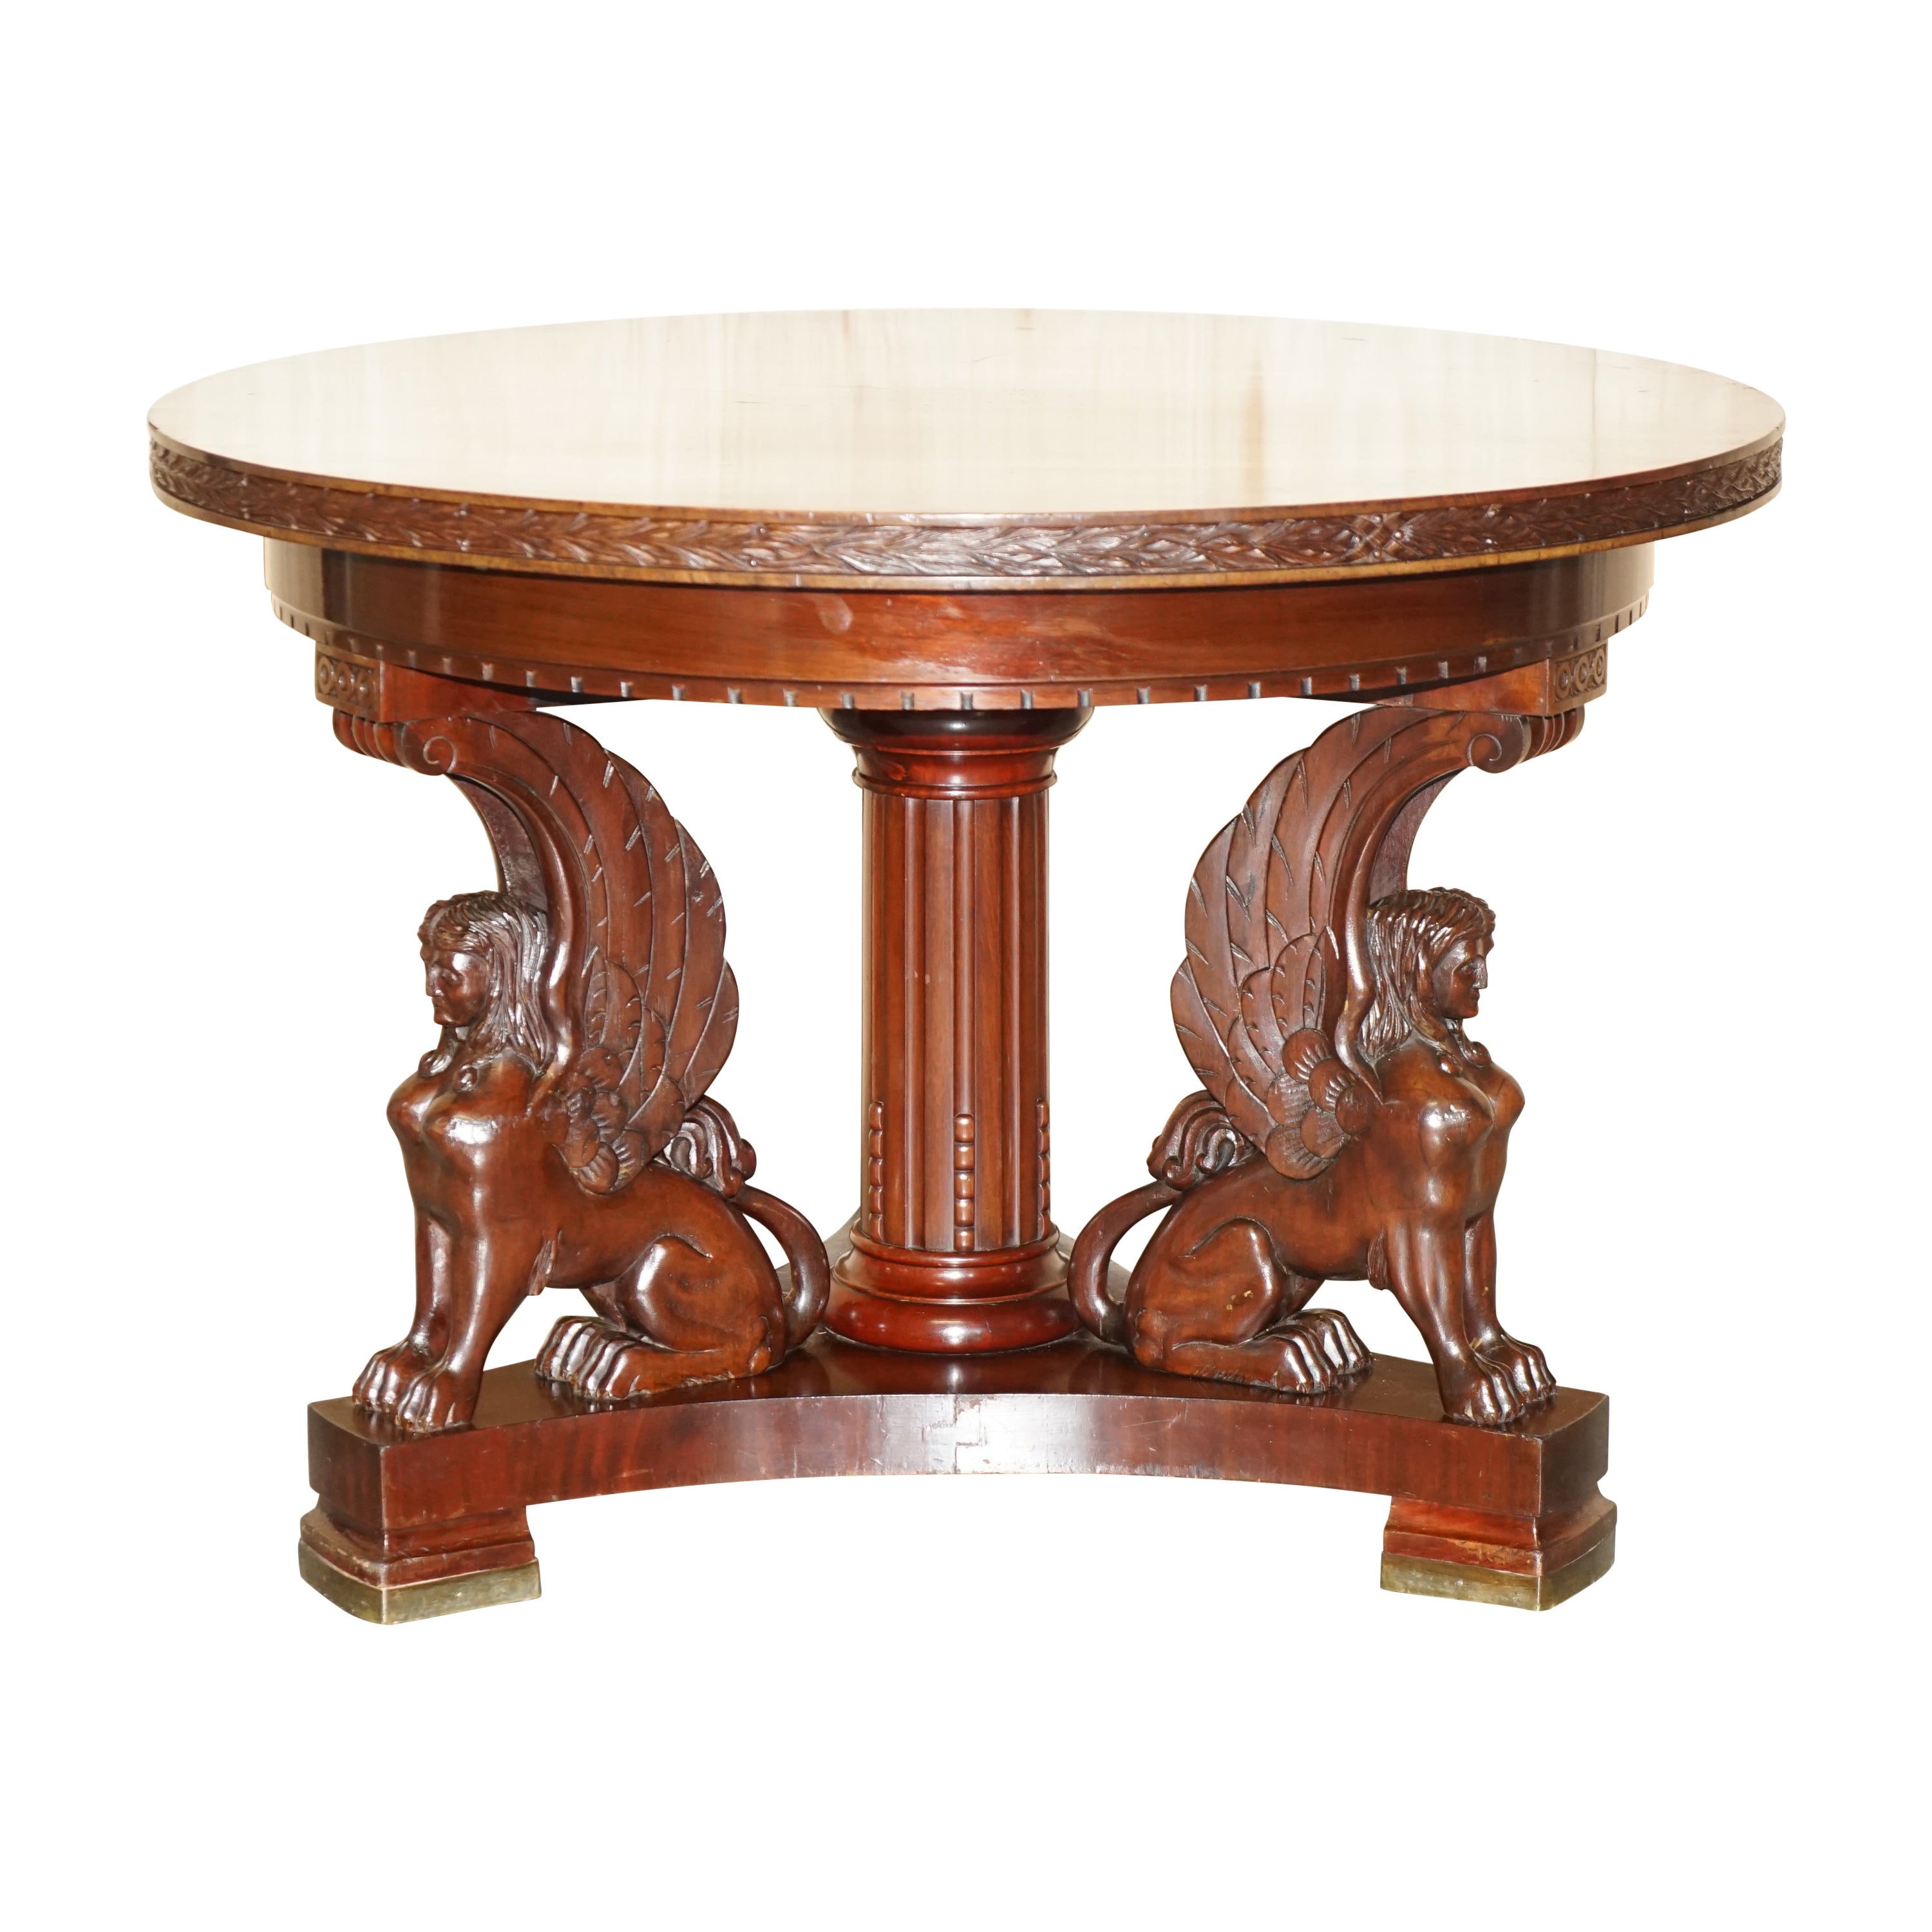 Fine Antique French Neoclassical Hardwood Centre Table with Sphinx Pillared Base